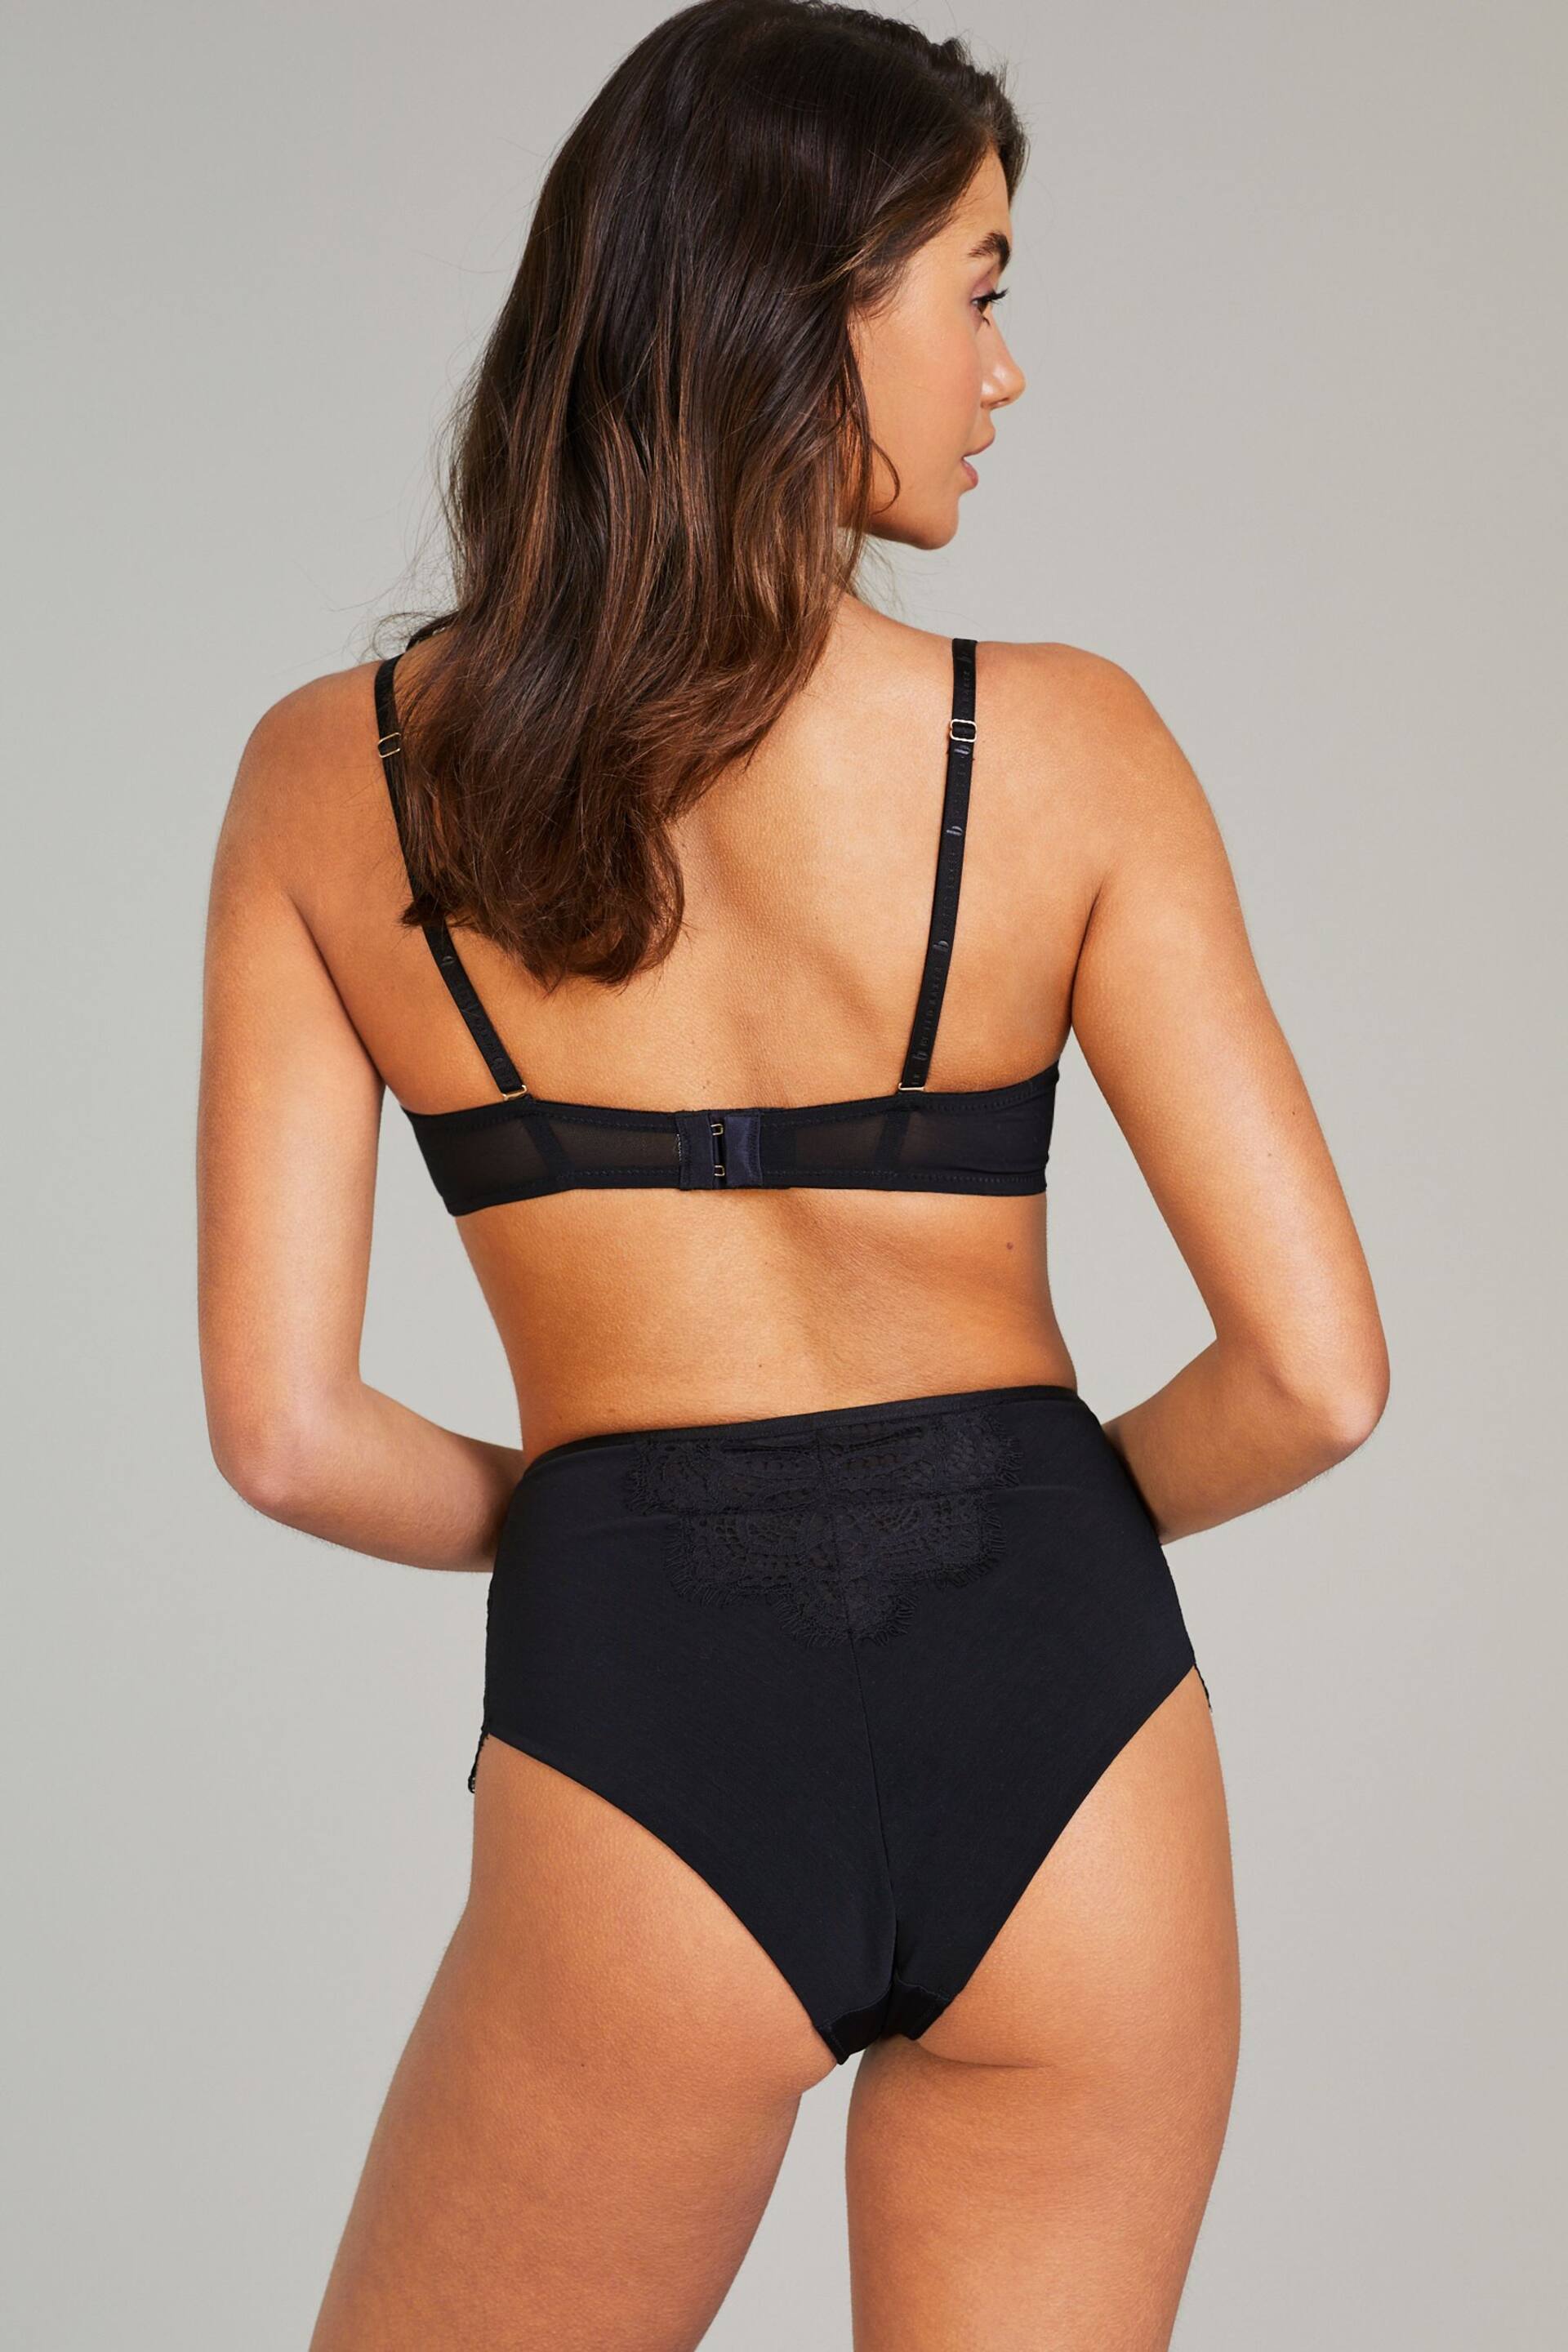 B by Ted Baker Tummy Control Lace Briefs - Image 4 of 8